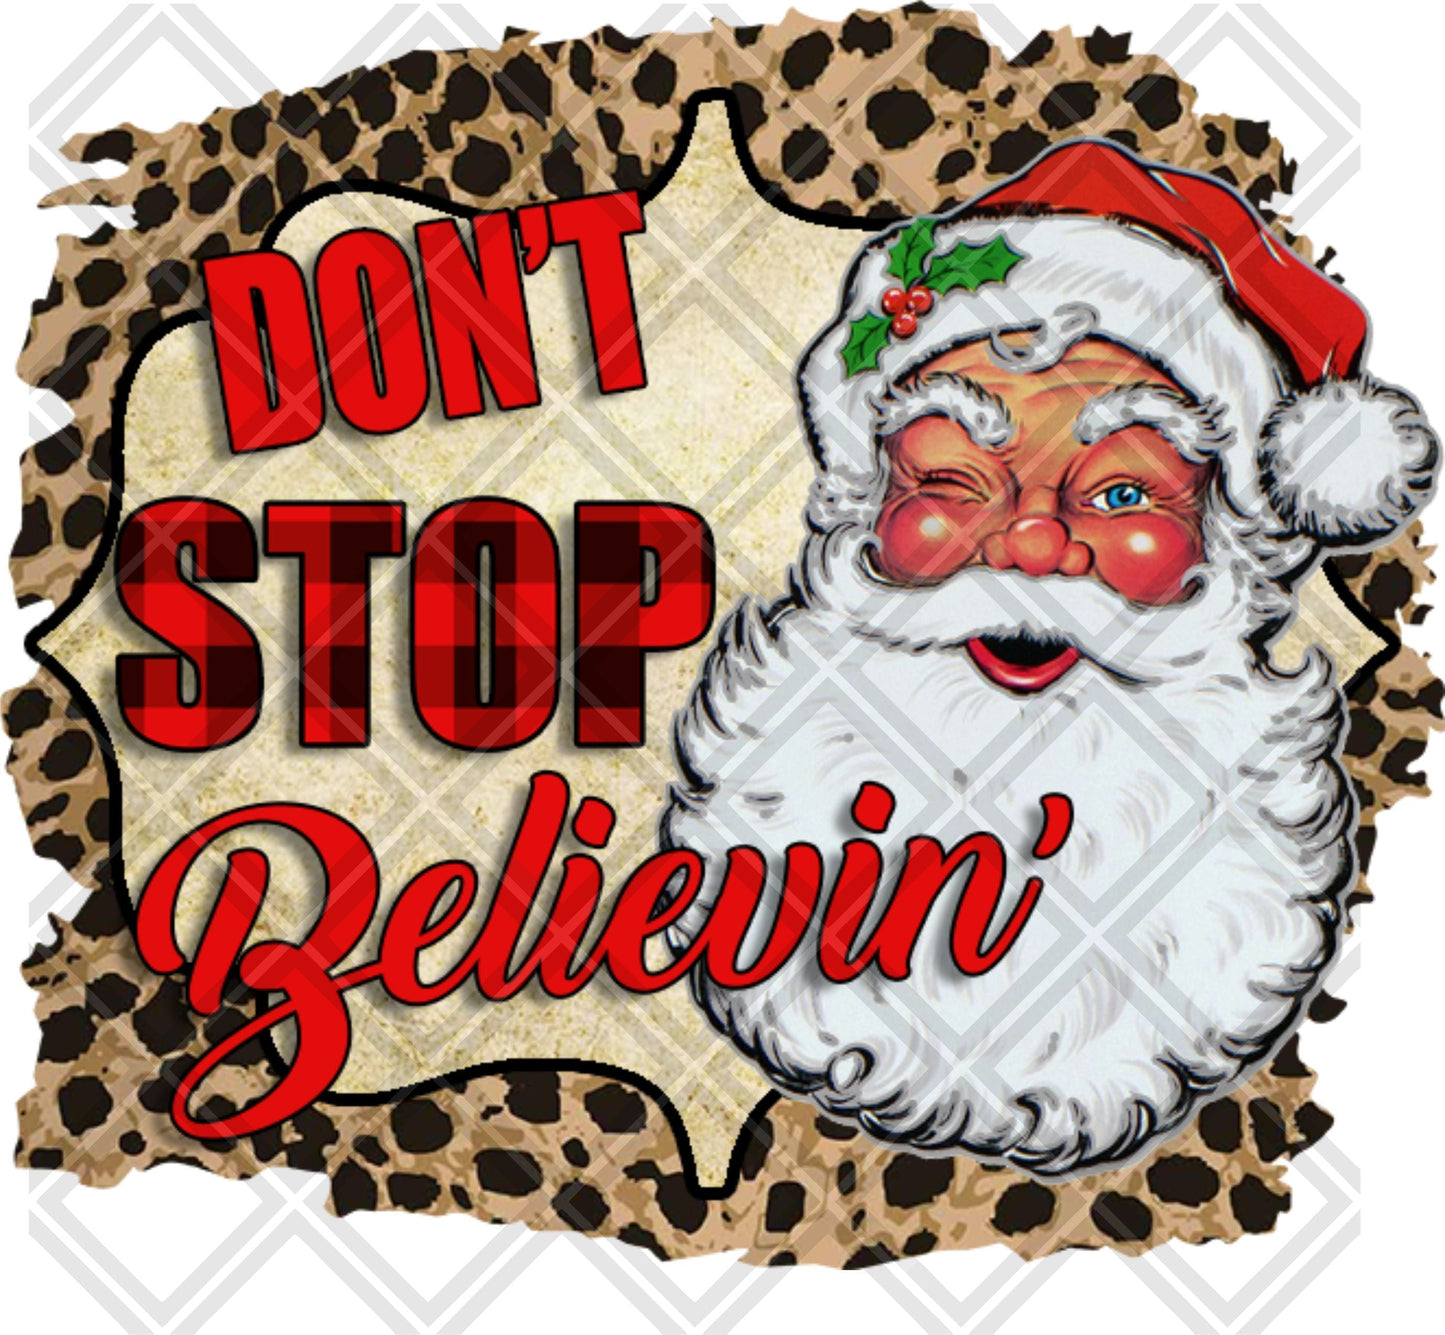 Dont Stop Believin DTF TRANSFERPRINT TO ORDER